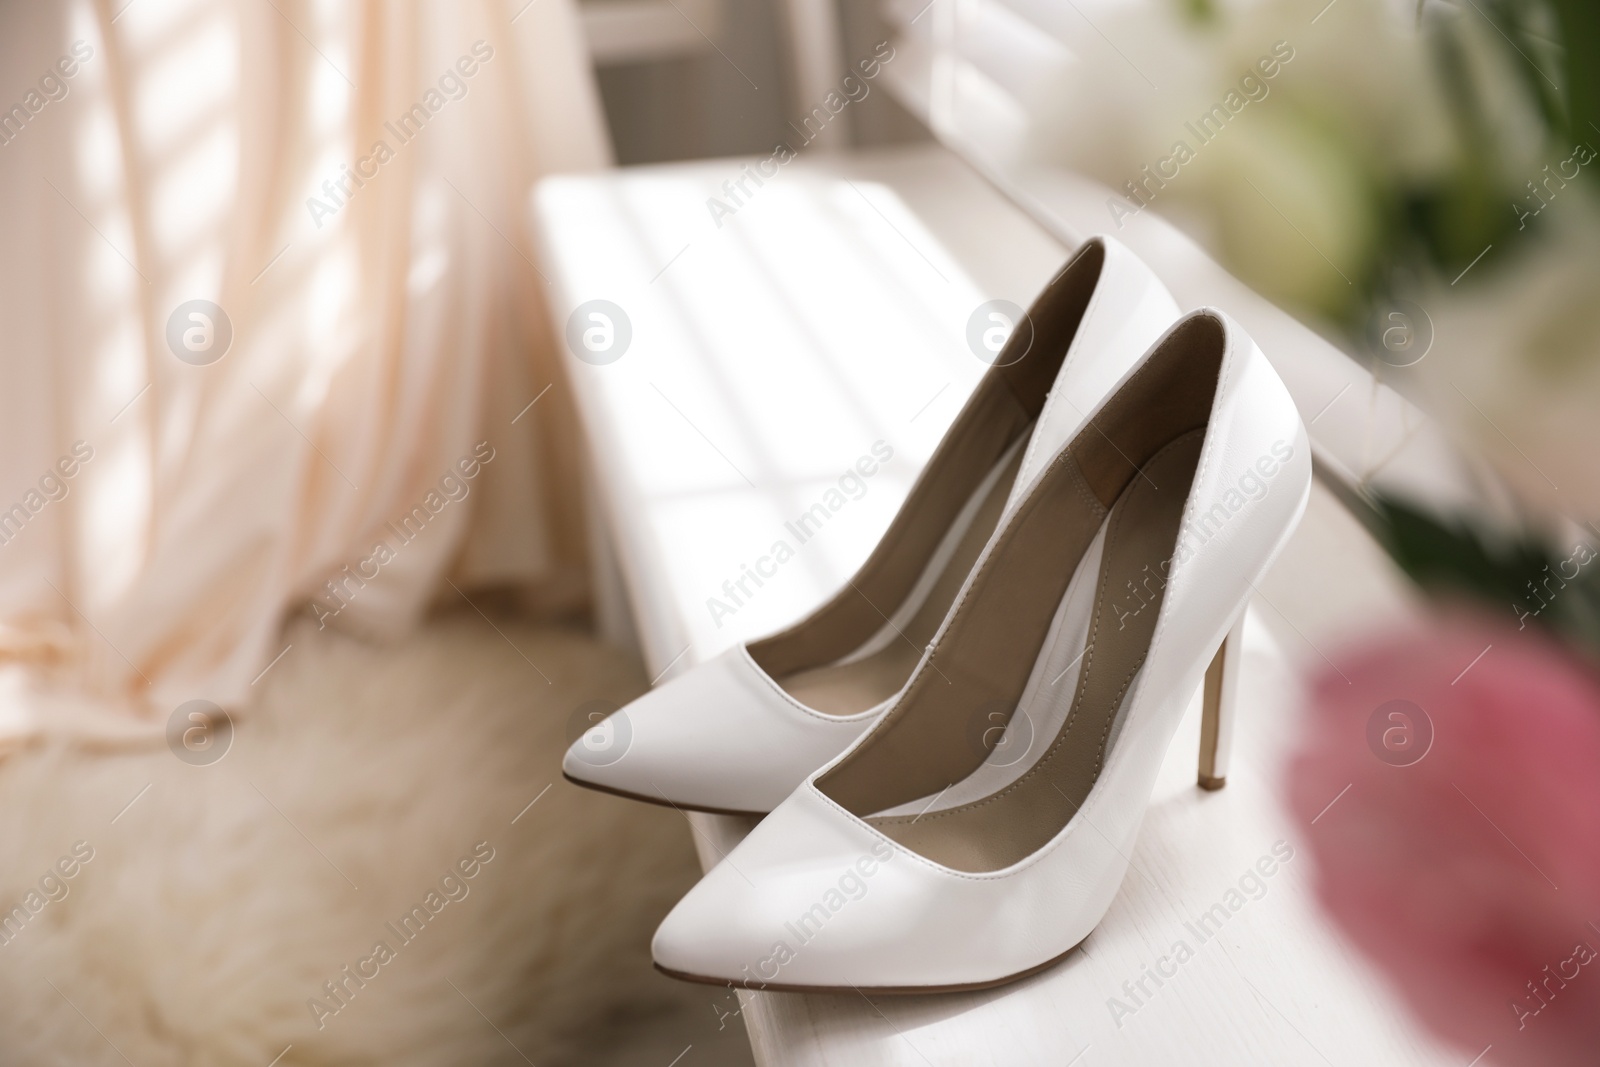 Photo of Pair of white high heel shoes and blurred wedding dress on background, space for text